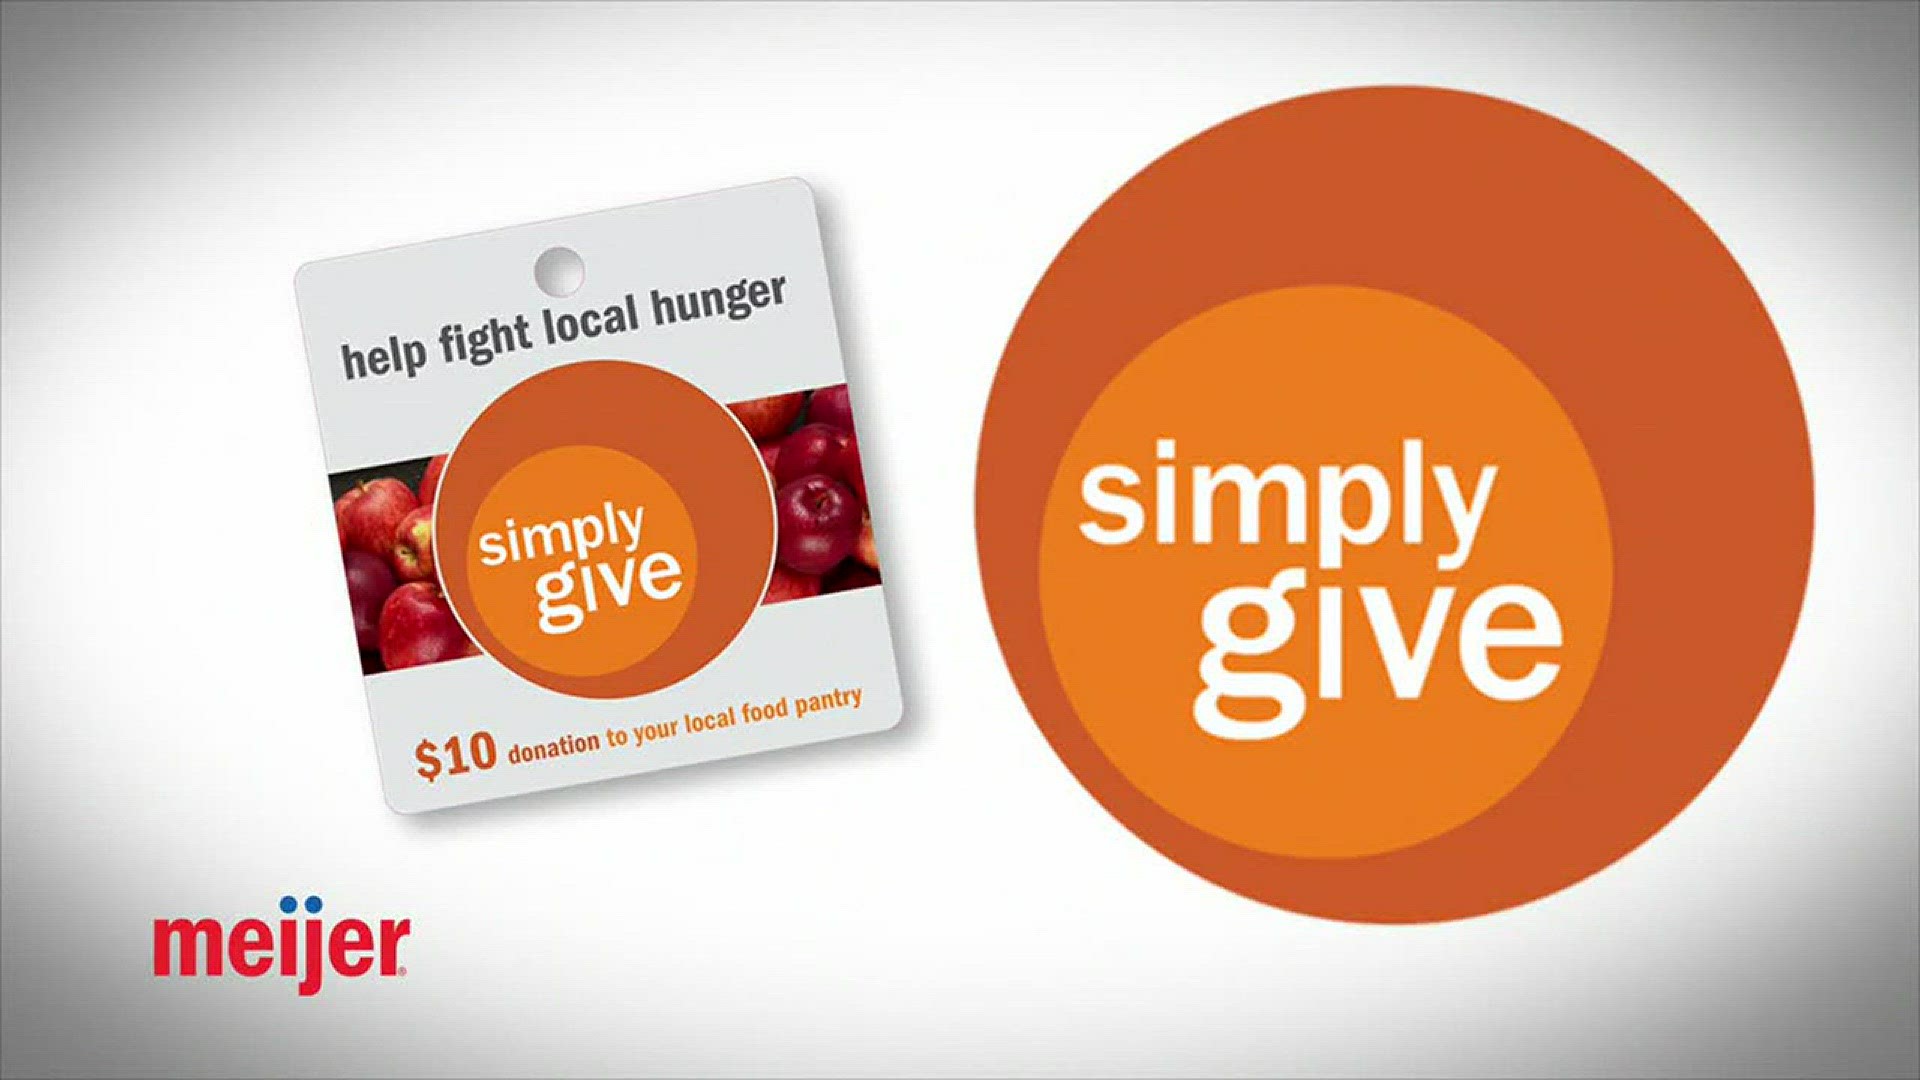 The Exchange: Meijer Simply Give